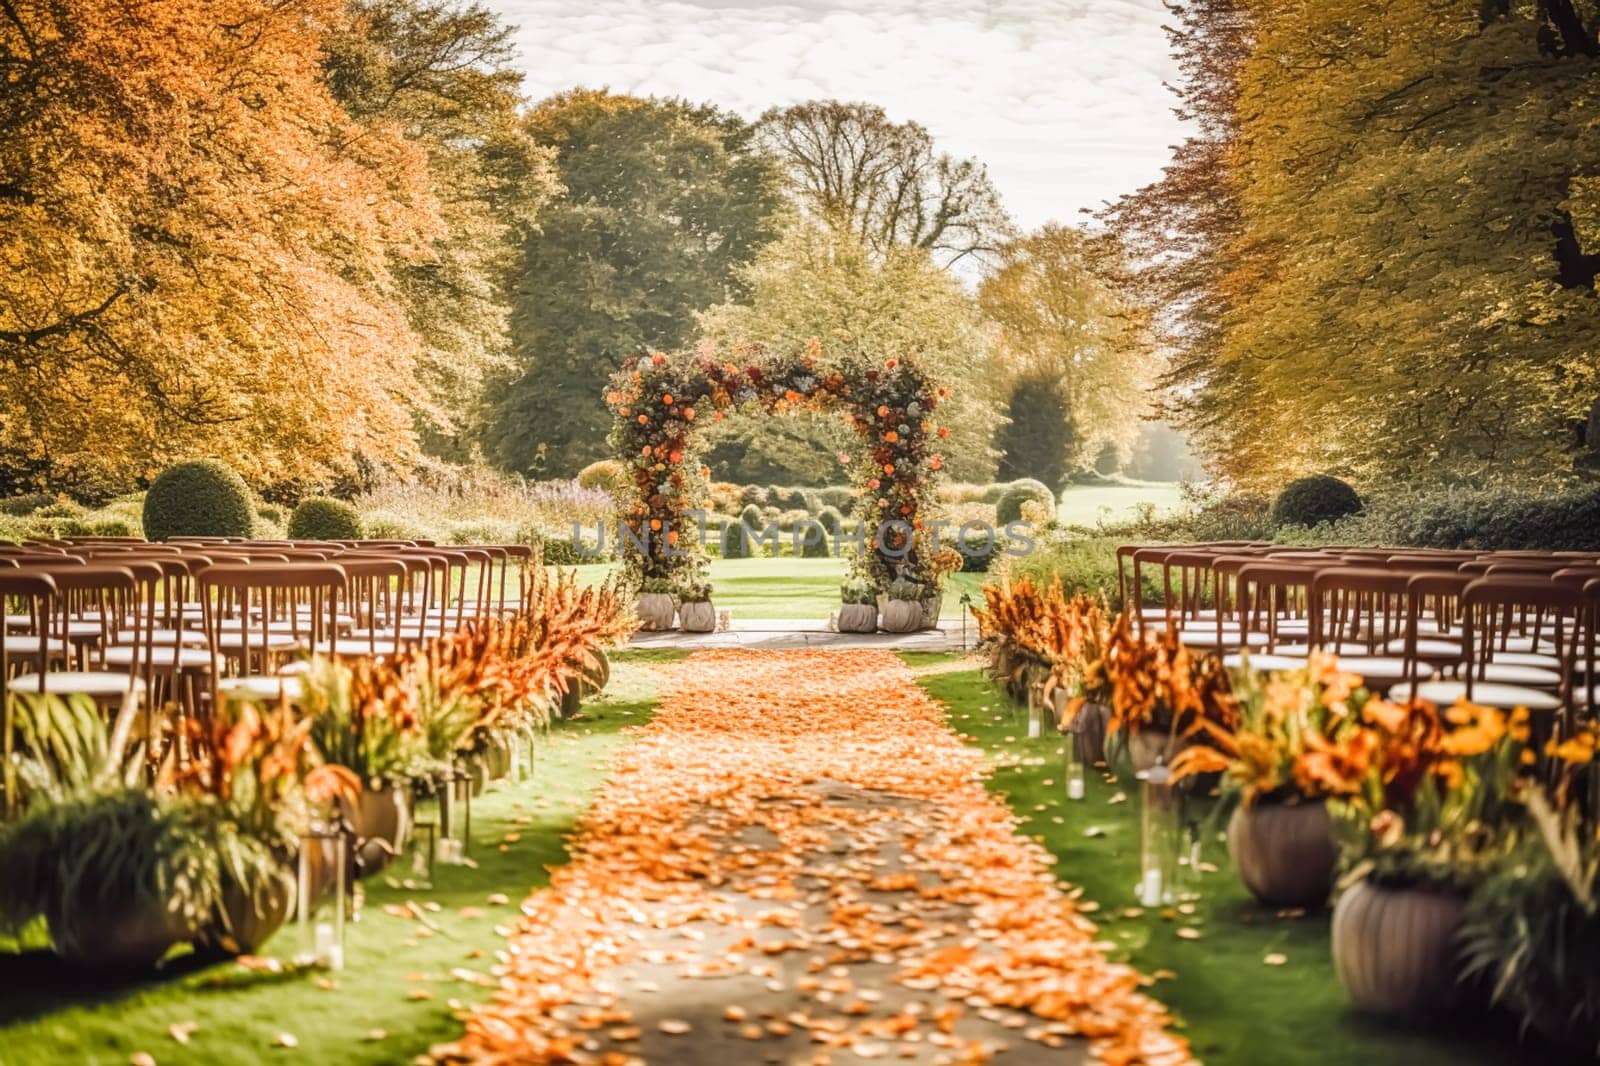 Wedding aisle, floral decor and marriage ceremony, autumnal flowers and decoration in the English countryside garden, autumn country style by Anneleven